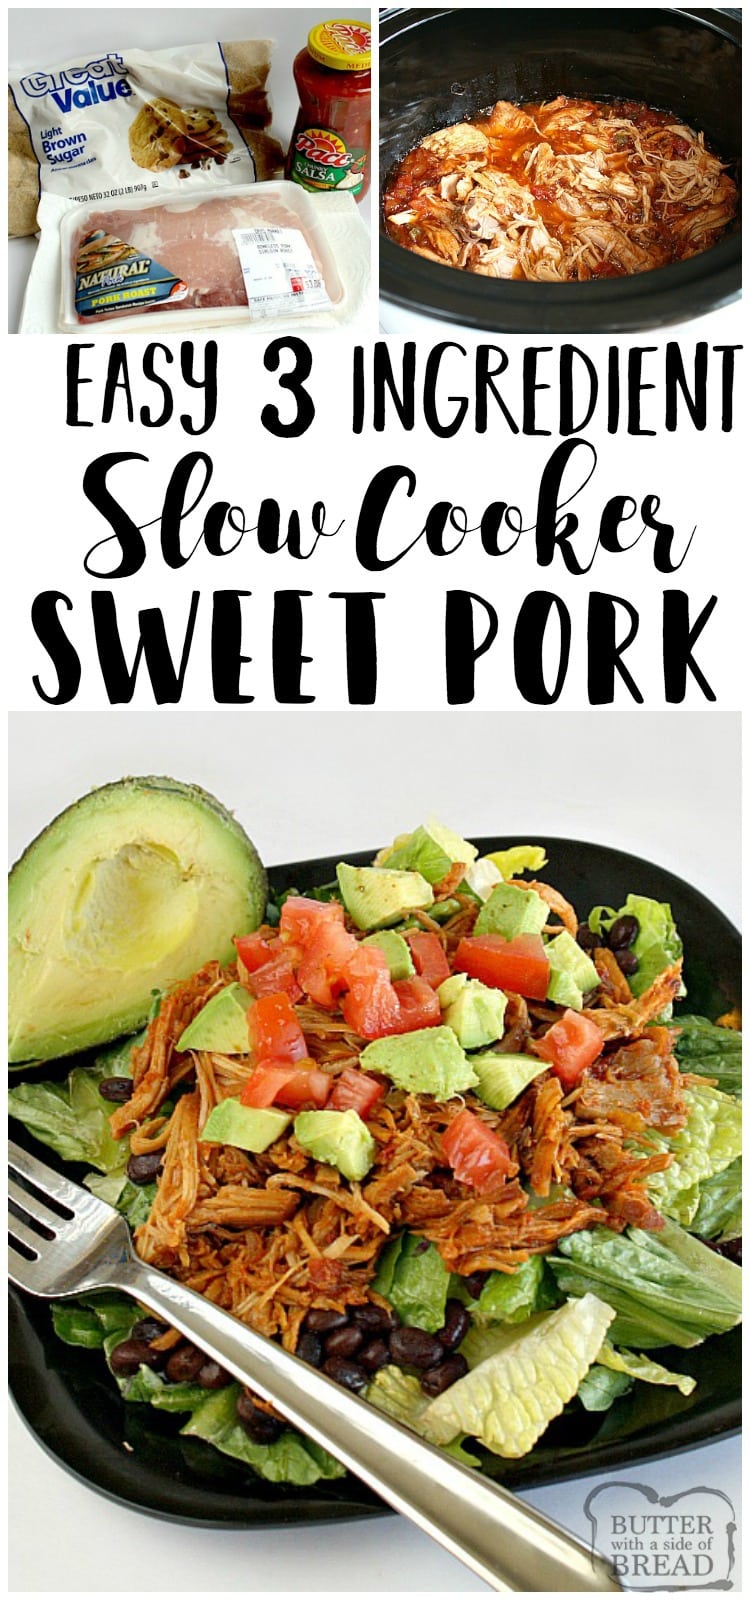 Easy Slow Cooker Sweet Pork requires just 3 ingredients and a slow cooker! Perfect for busy days when you need a delicious meal without the fuss. Serve in tortillas, on a salad, or as a sandwich! 